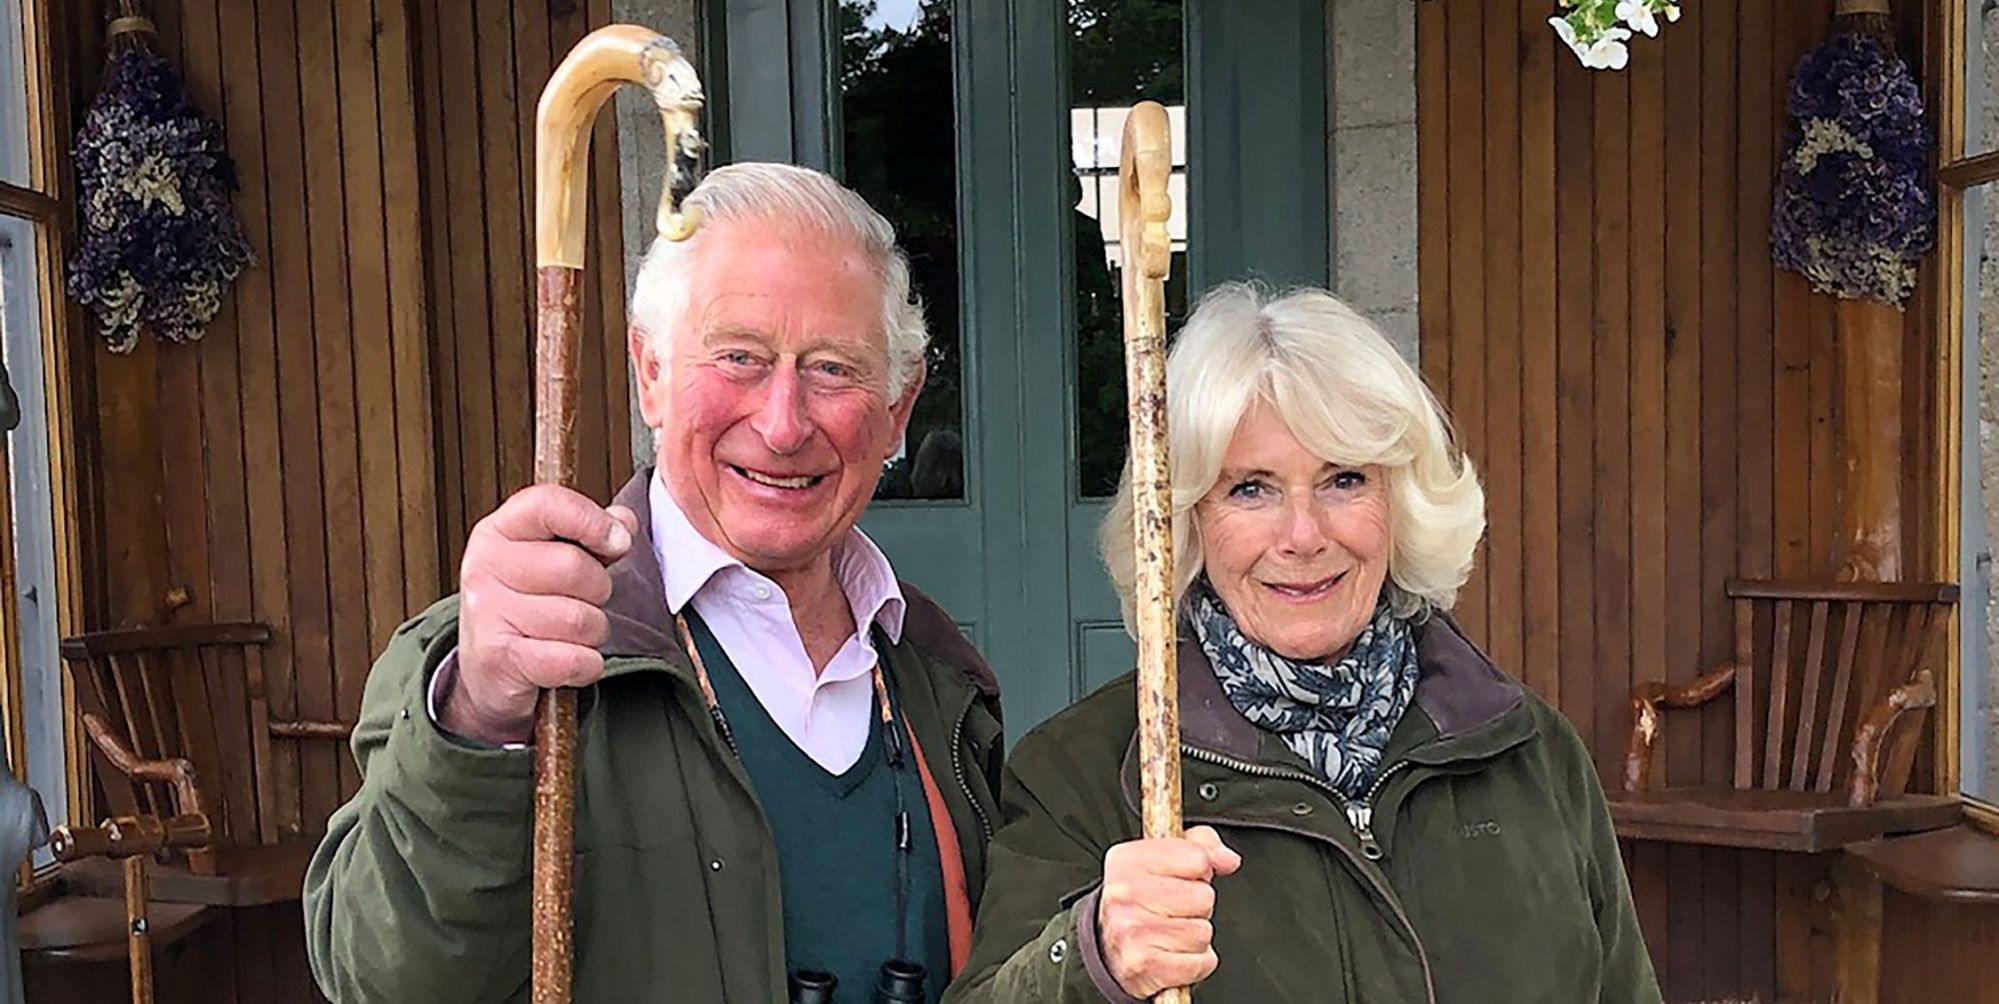 Prince Charles and Camilla release a new photo as the royals spend Christmas separately